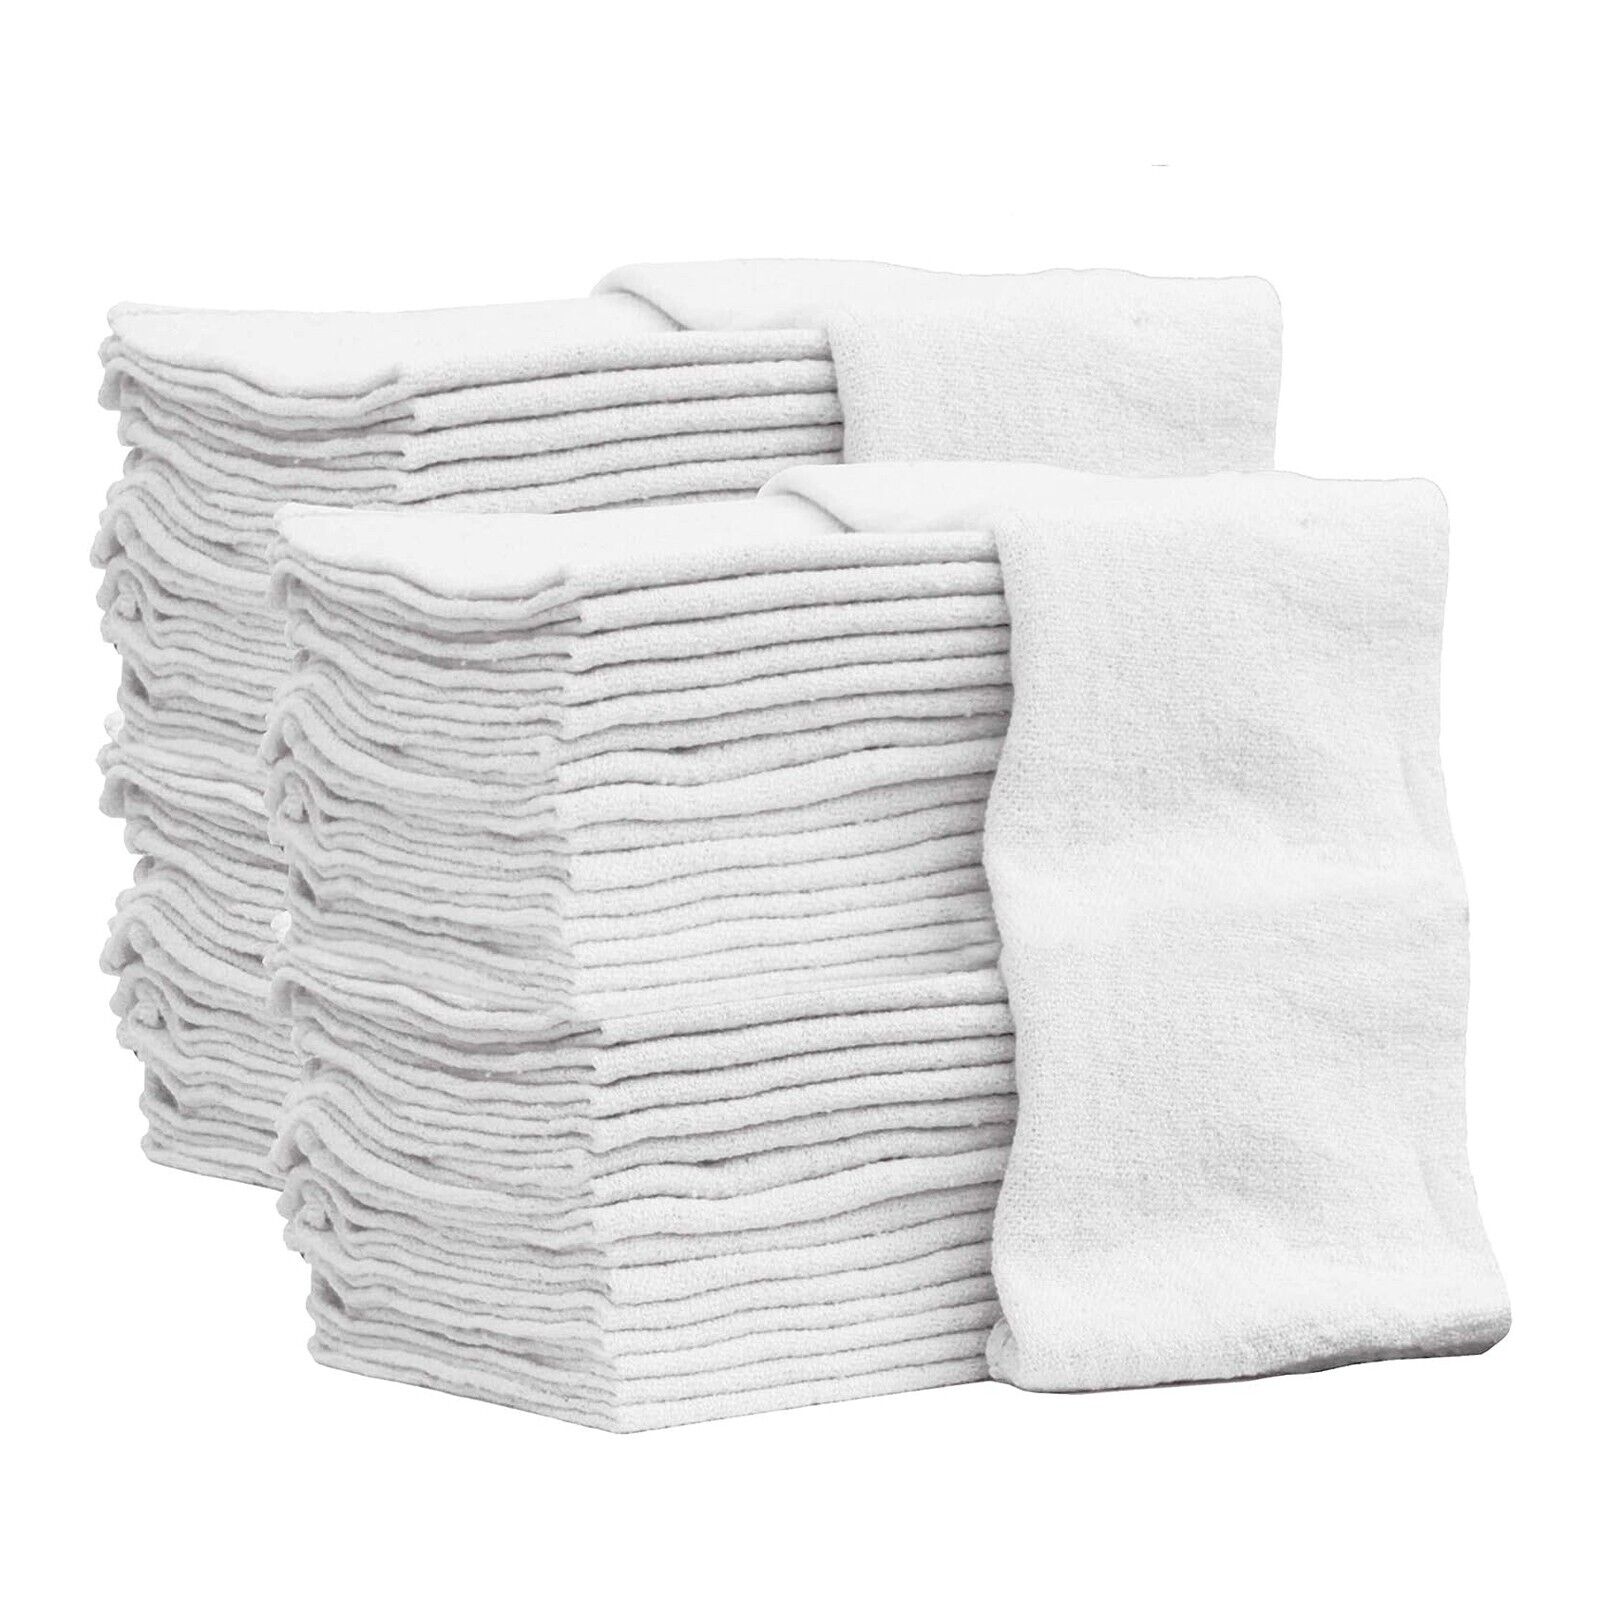 2000 New Industrial A-Grade Shop Rags Cleaning Towels White-Multipurpose Cloth